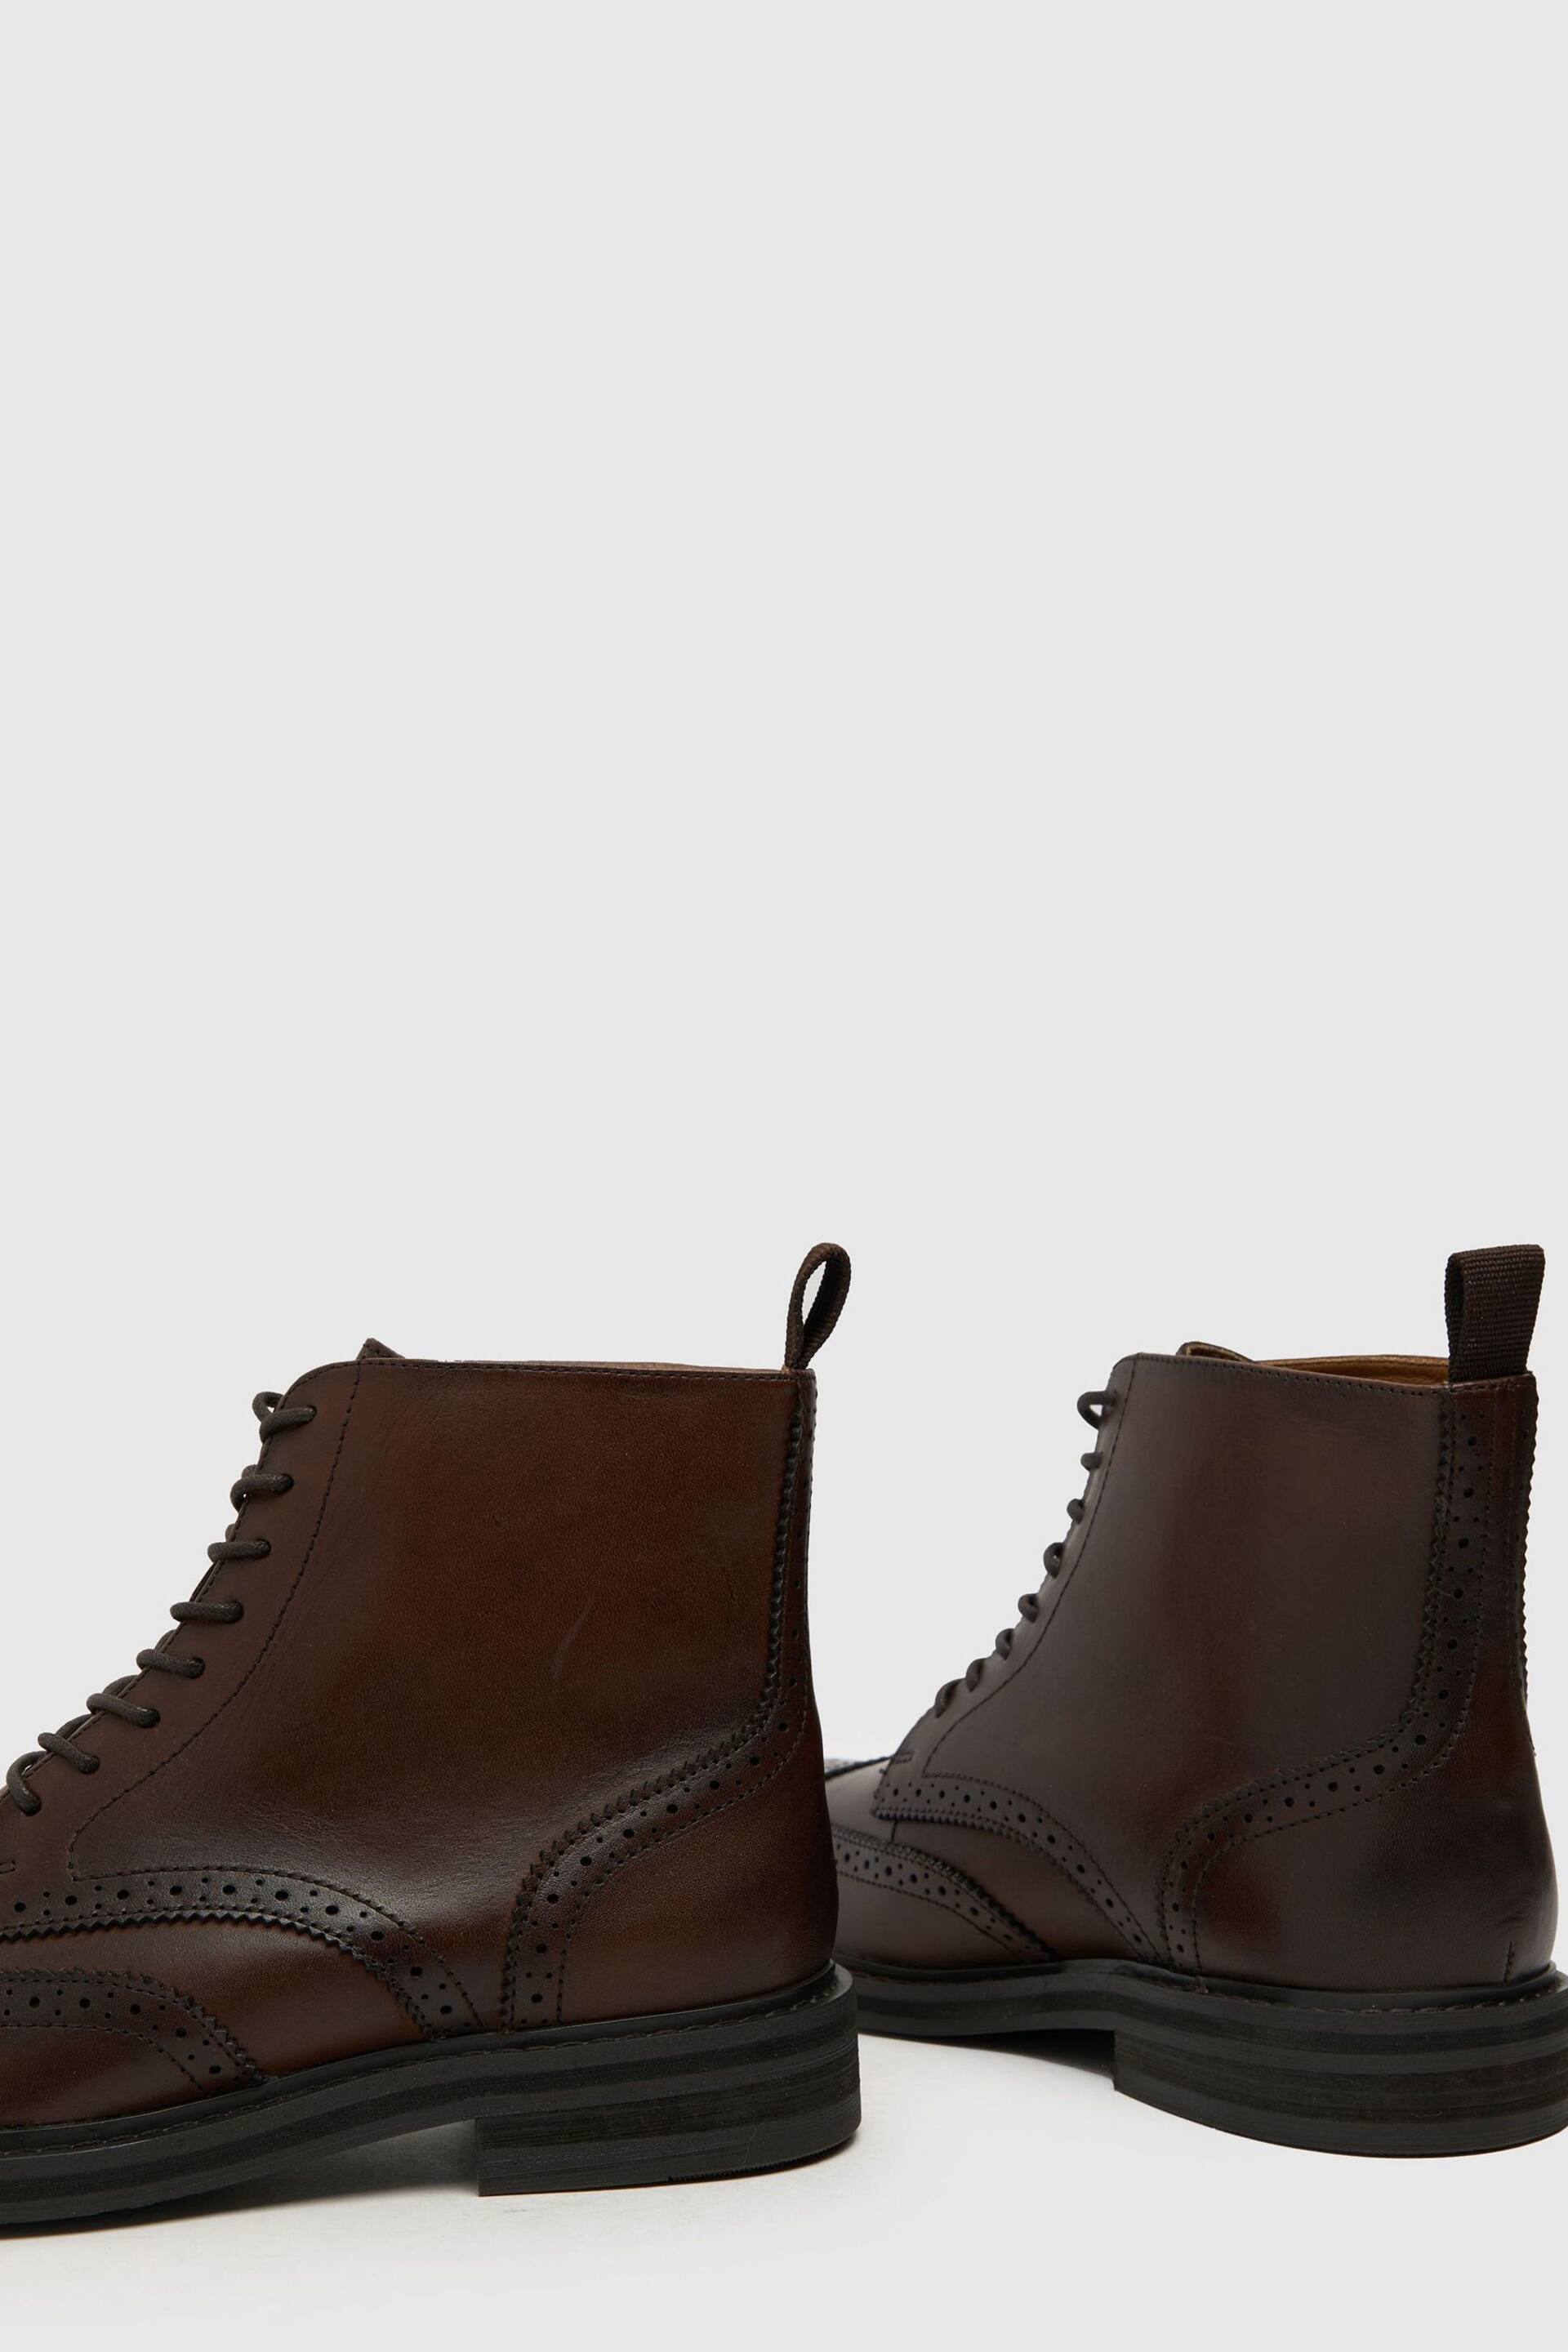 Schuh Draco Brogue Brown Boots - Image 3 of 4